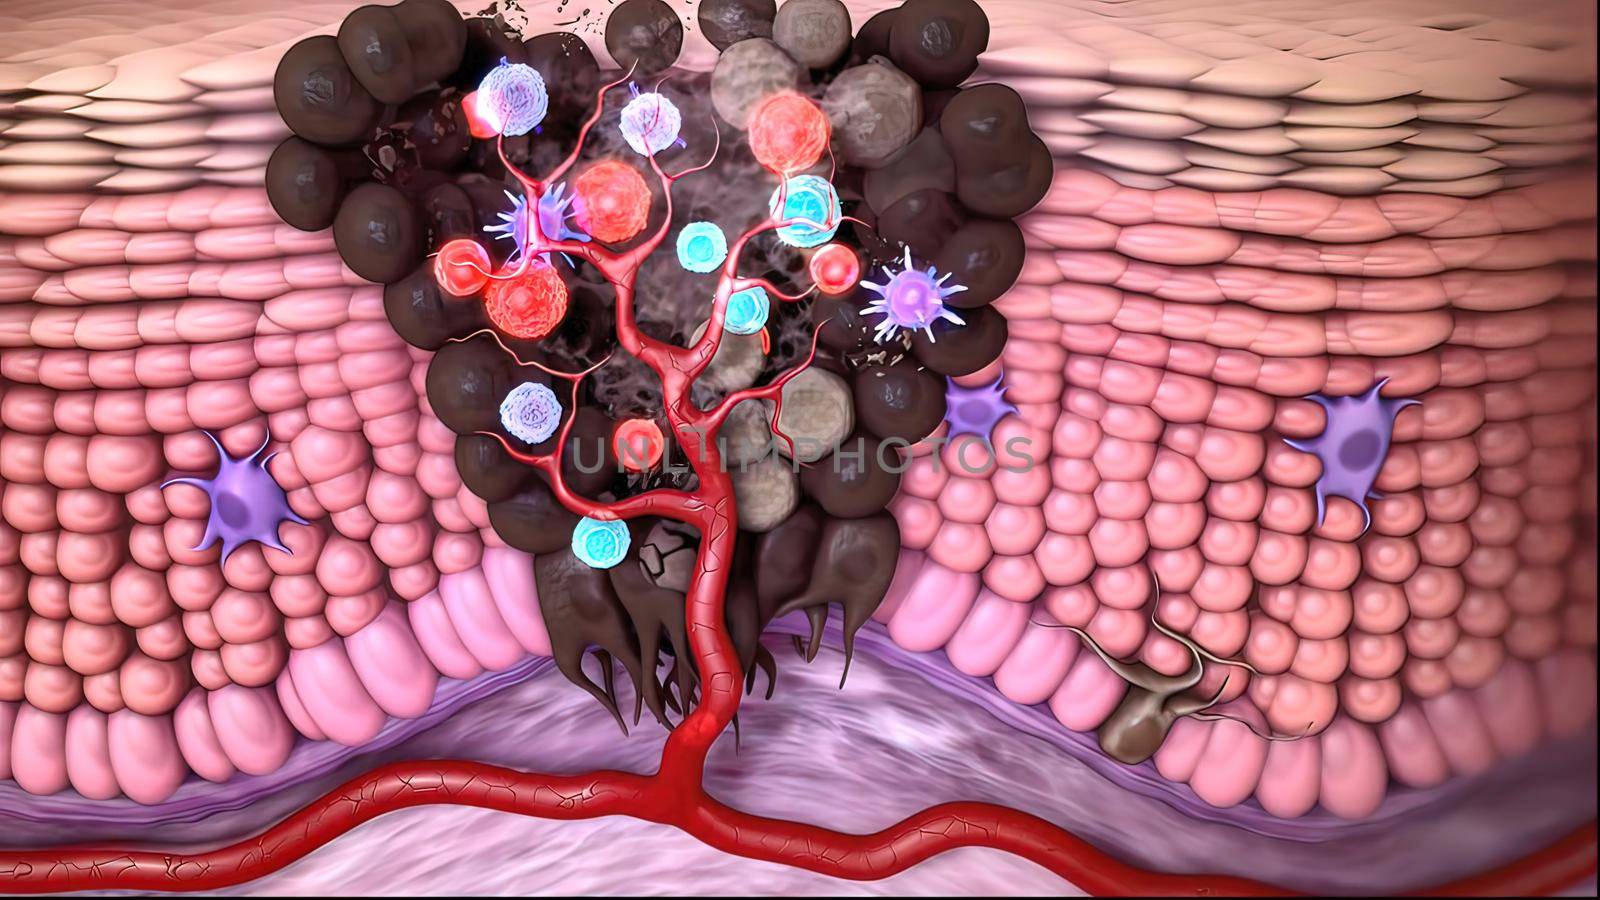 Antibodies destroy an infected cell by a virus, immun defense kill the infected cell 3D illustration